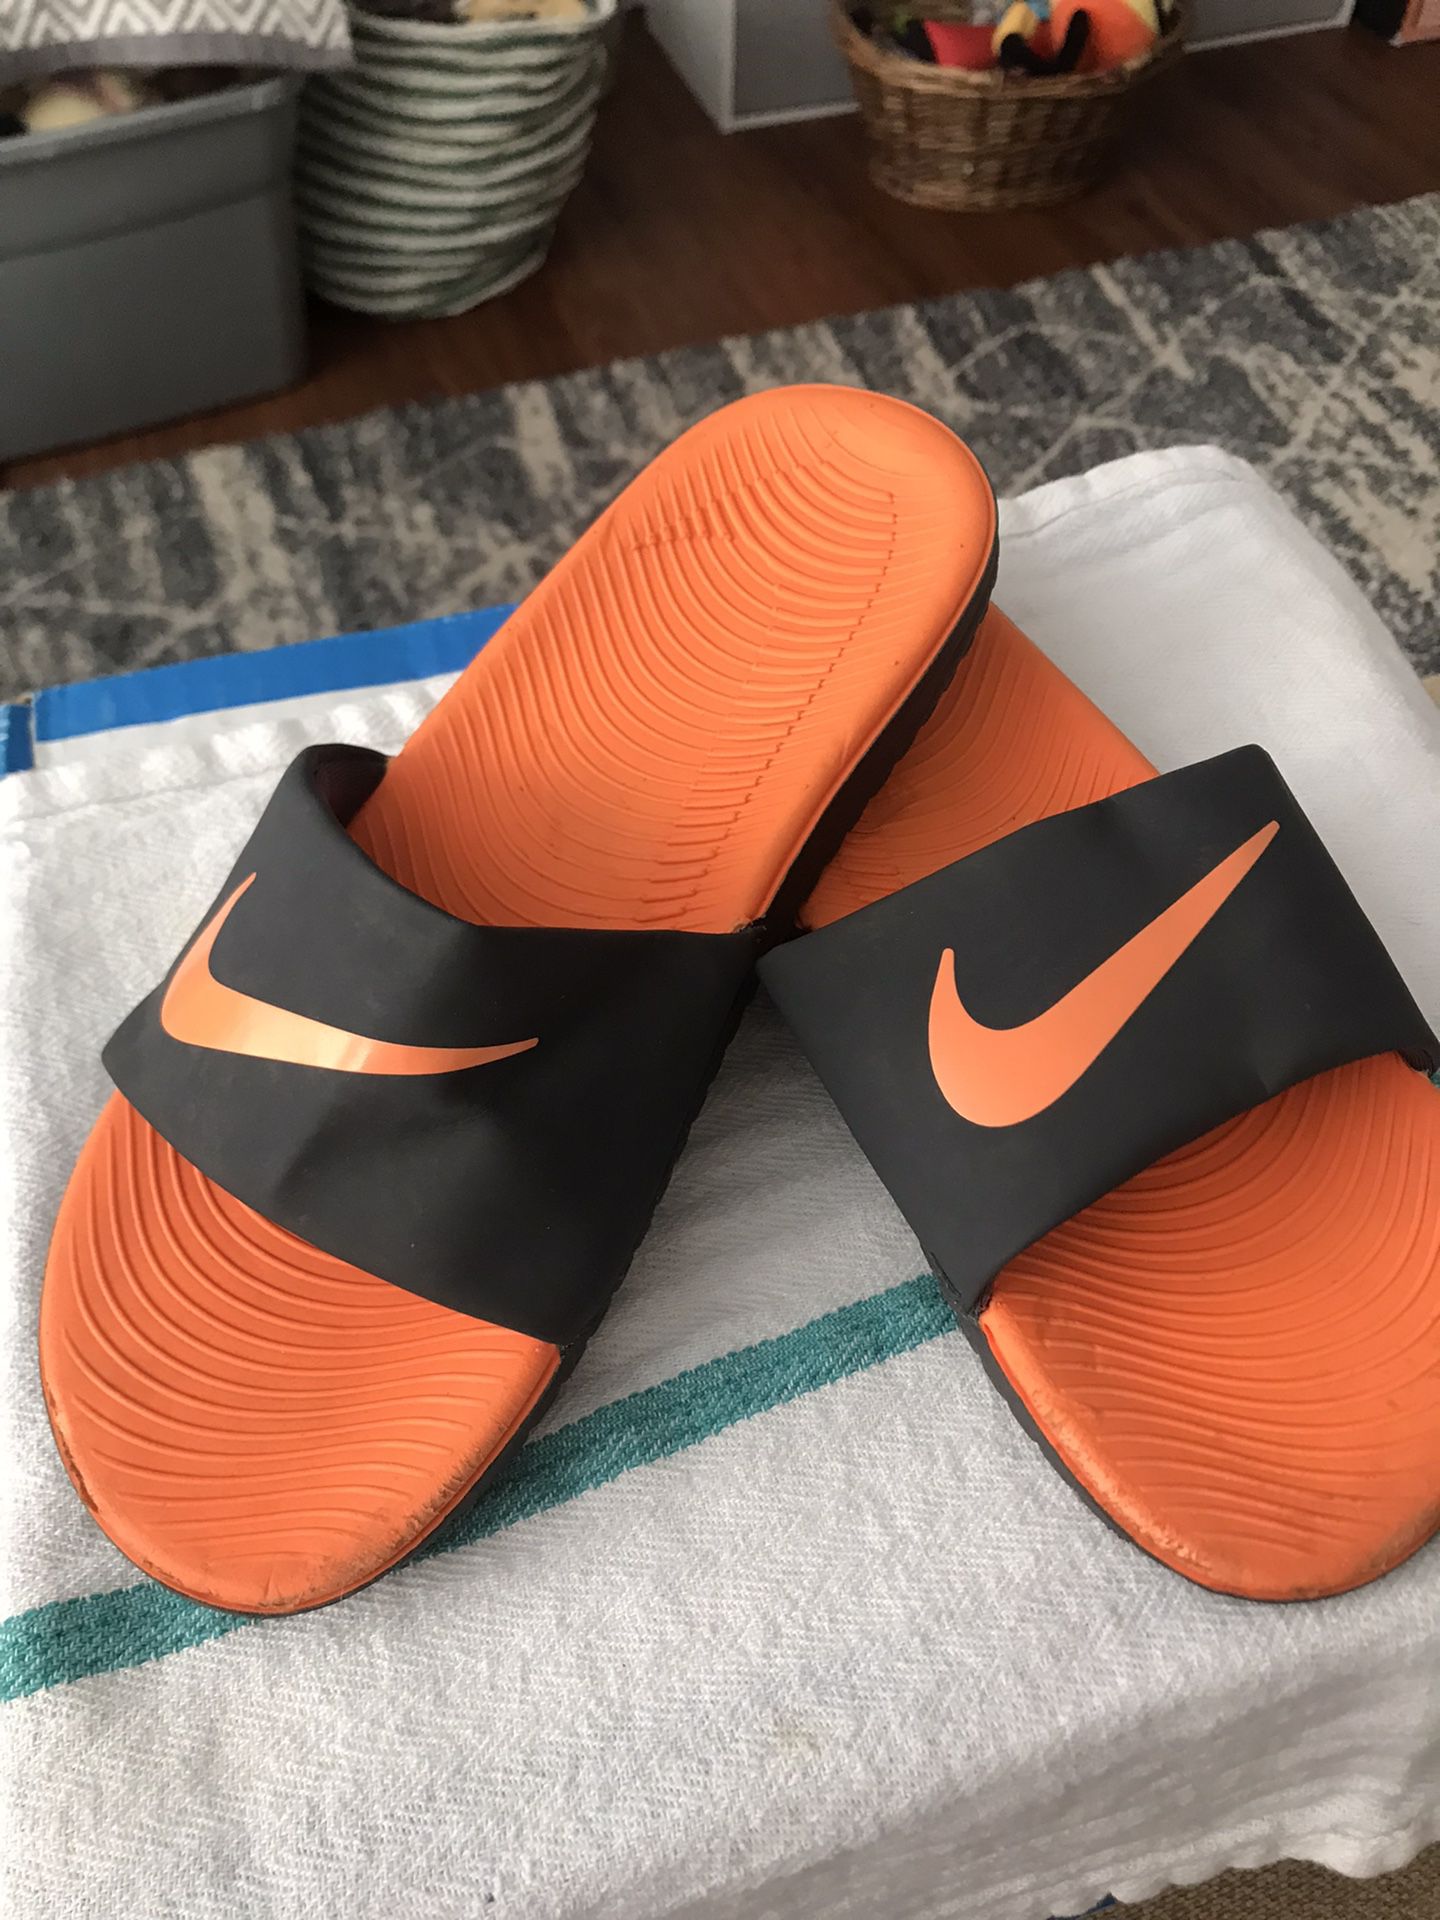 Nike Slides Size 5 Unisex for Sale in Hermitage, TN - OfferUp